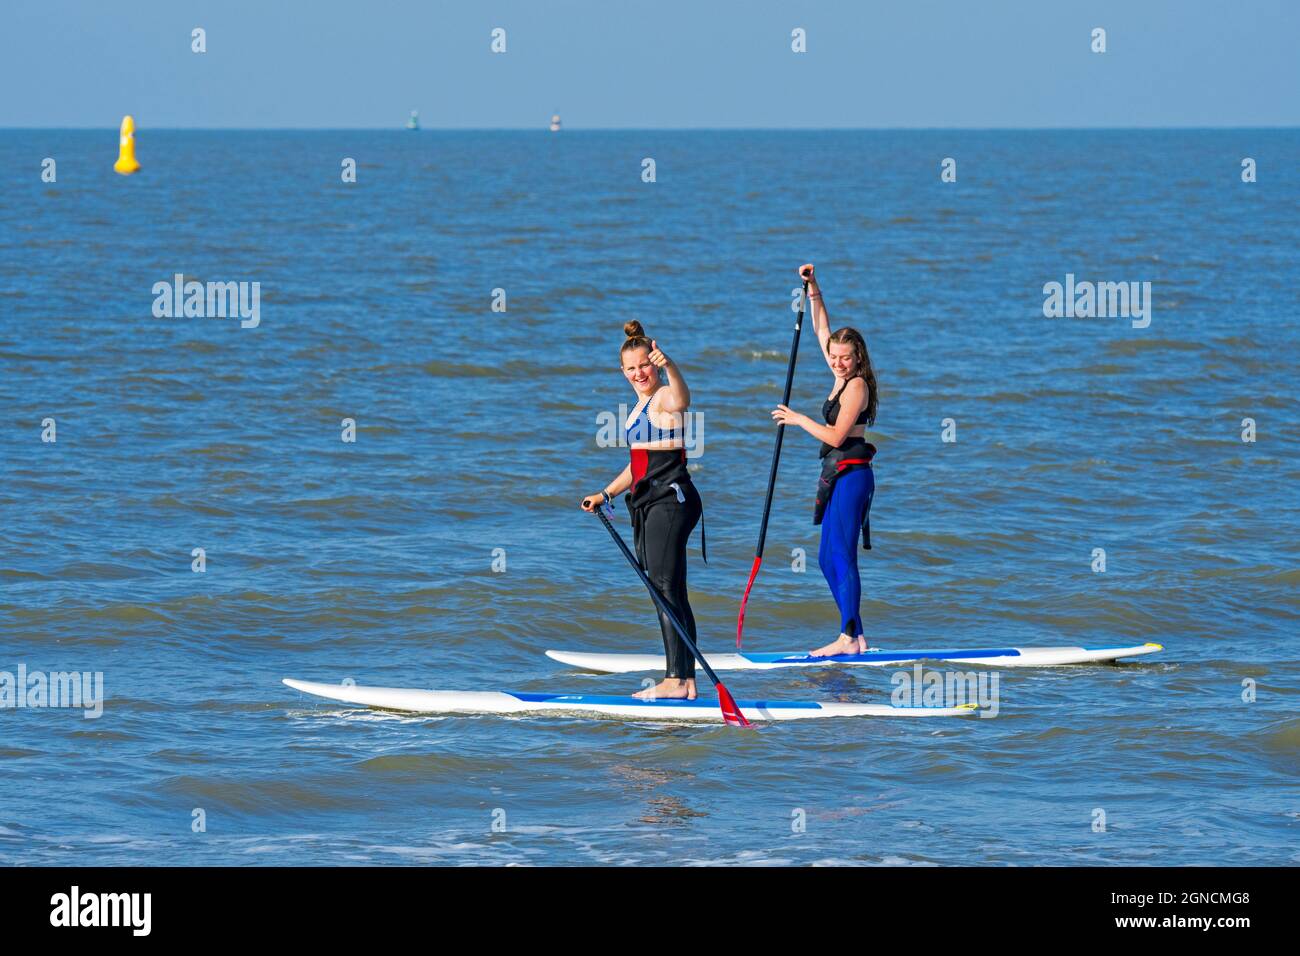 Two female paddleboarders practicing the water sport standup paddleboarding / stand up paddle boarding / SUP along the North Sea coast Stock Photo